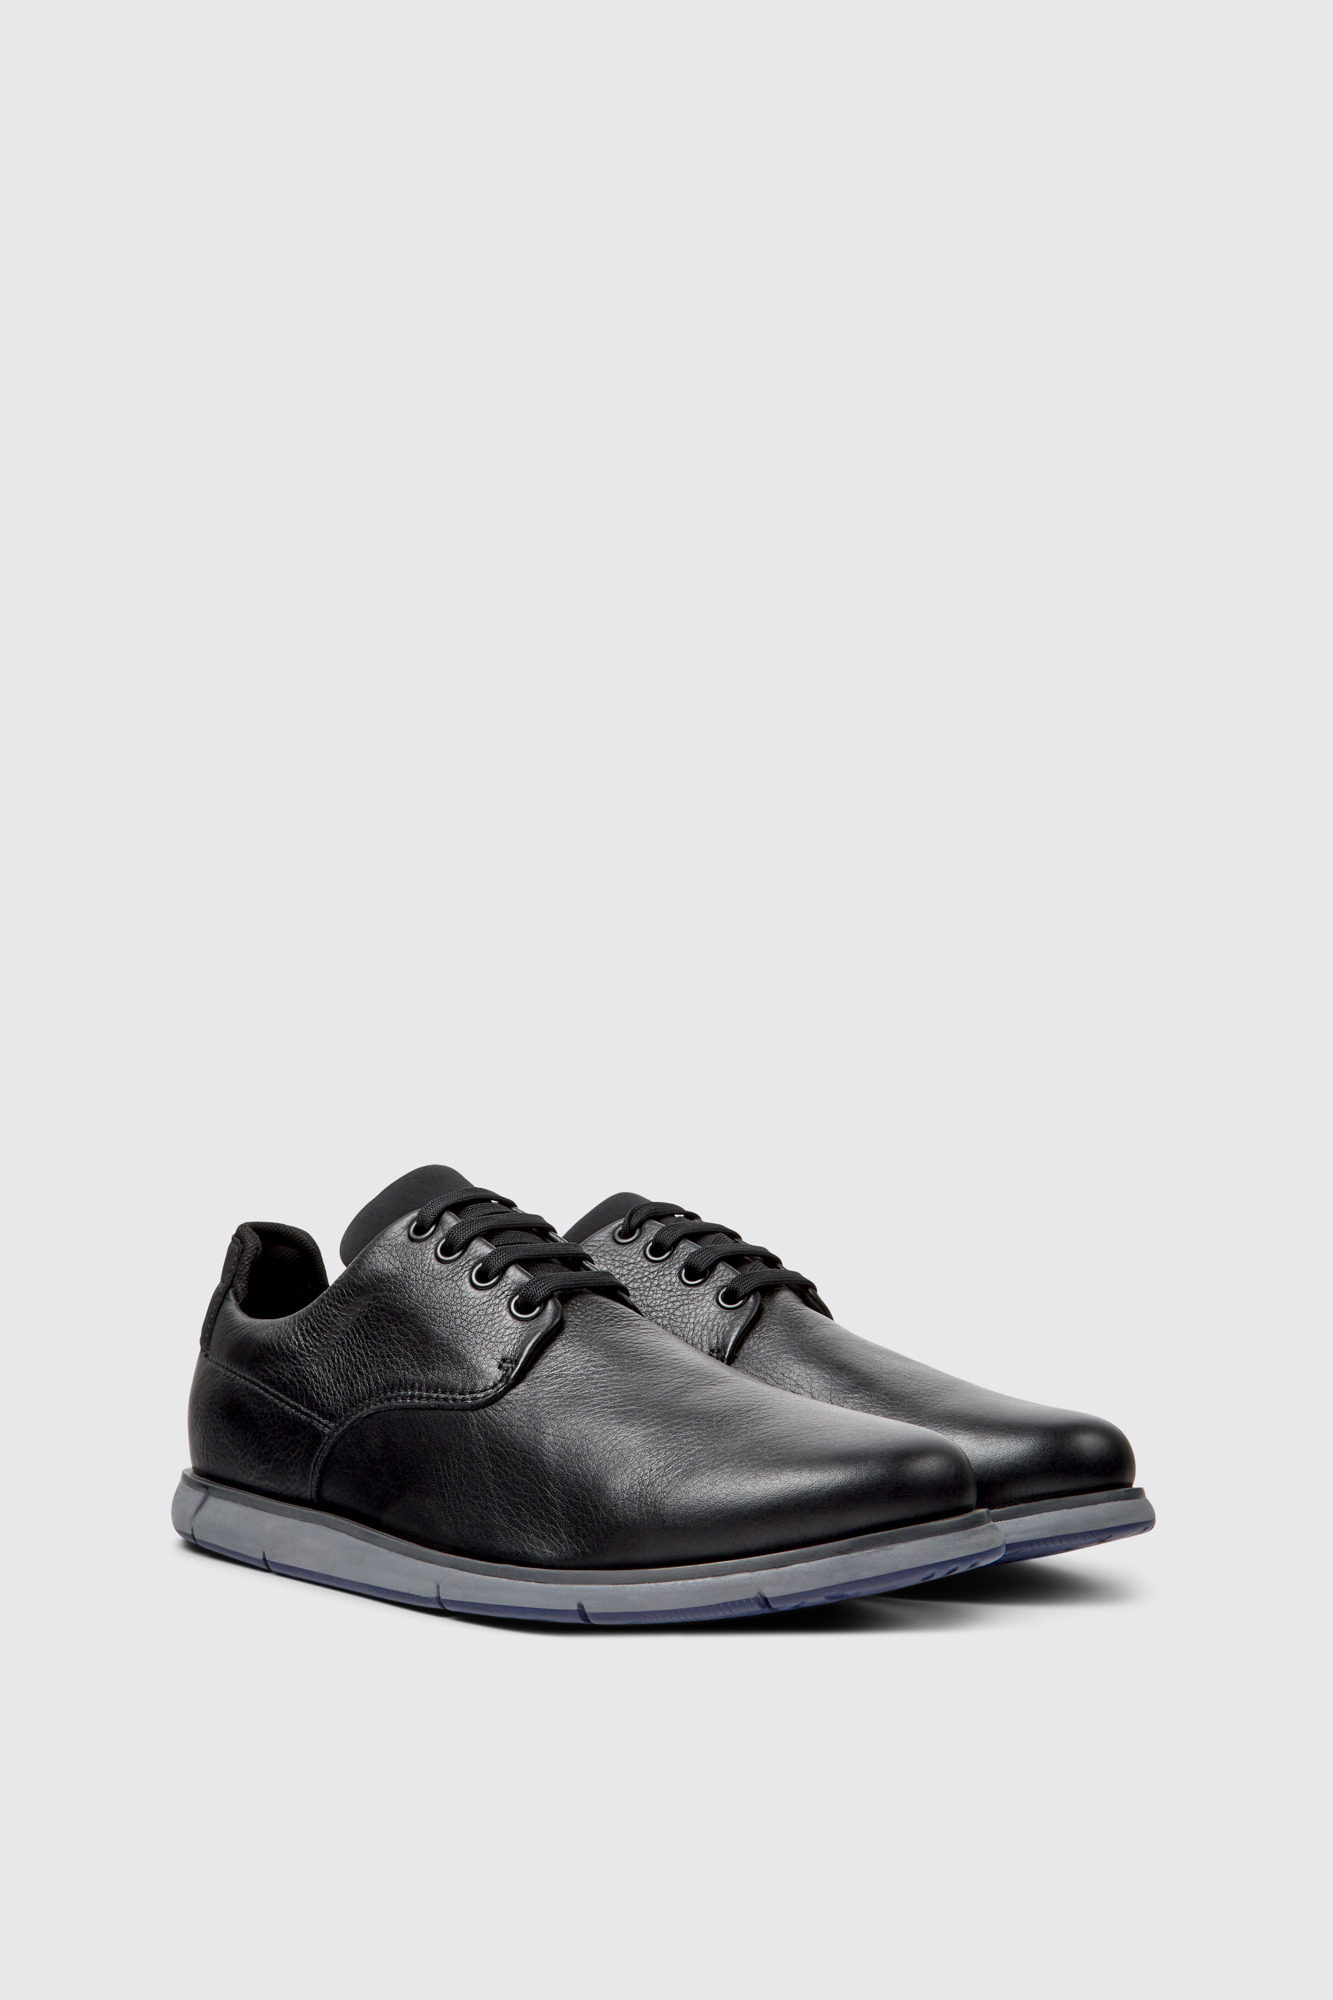 Shoes for Men - Fall/Winter Collection - Camper Greece